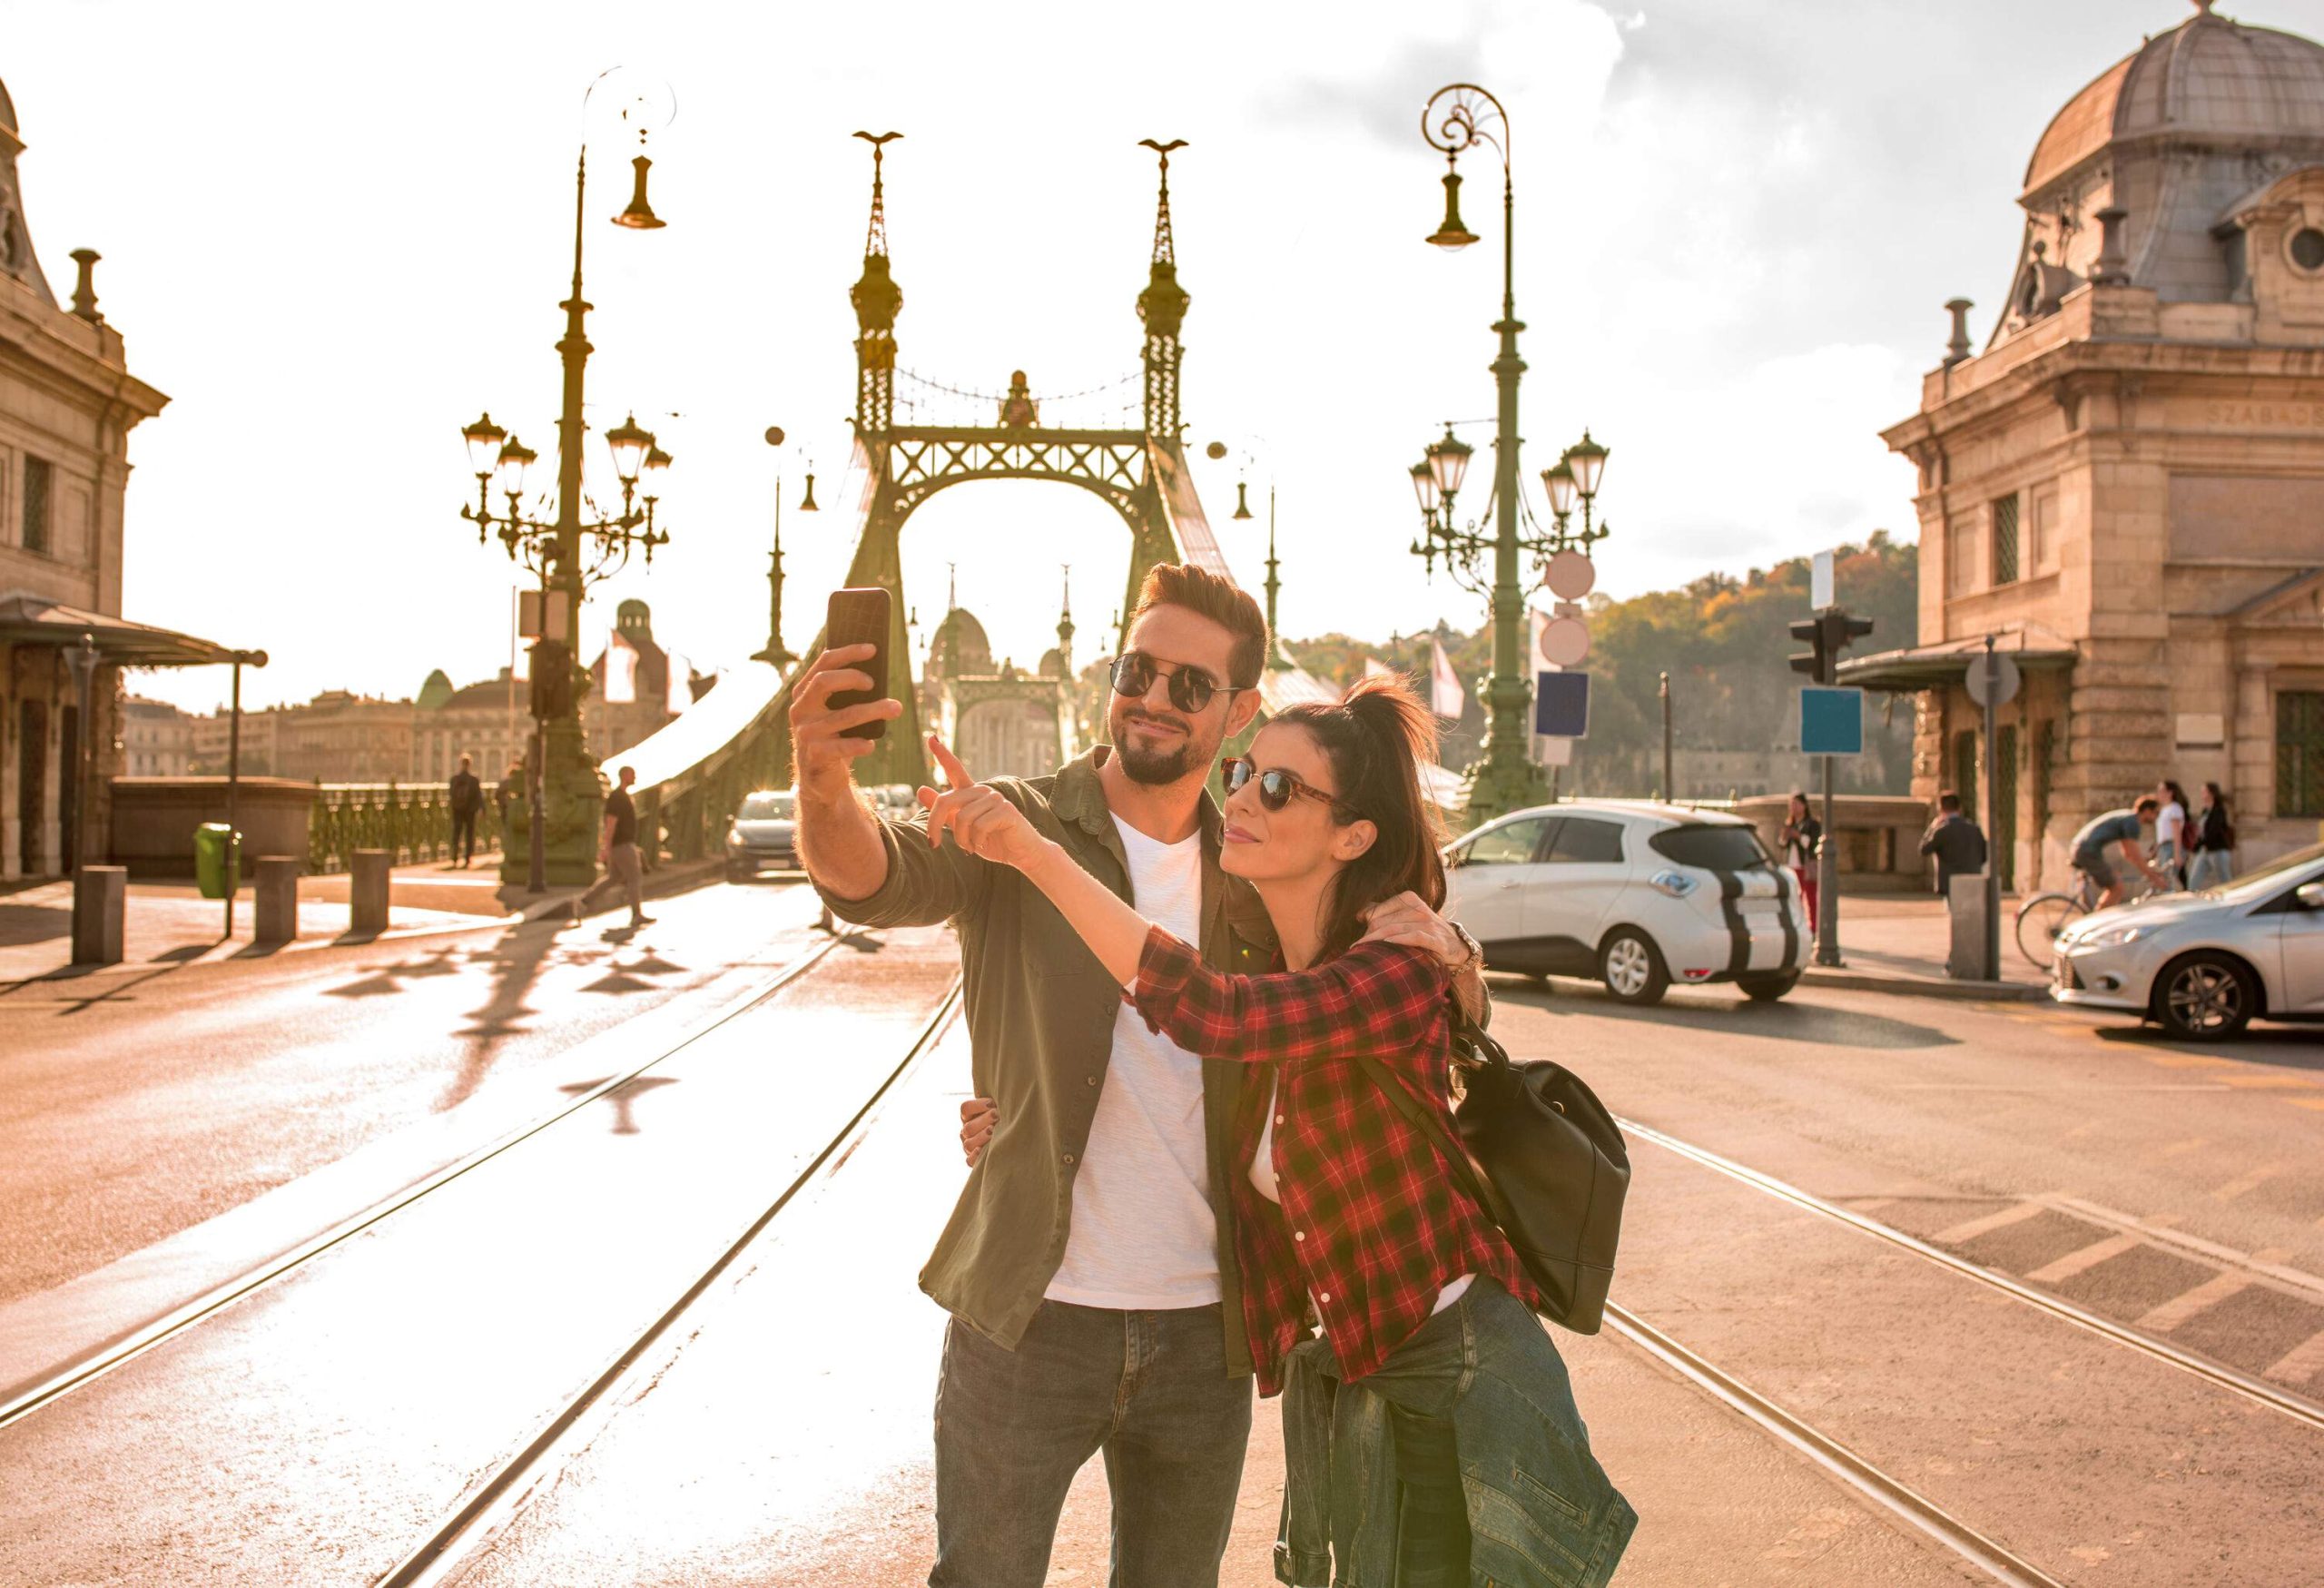 A happy couple takes a selfie with a famous and busy Liberty bridge in Budapest, Hungary.